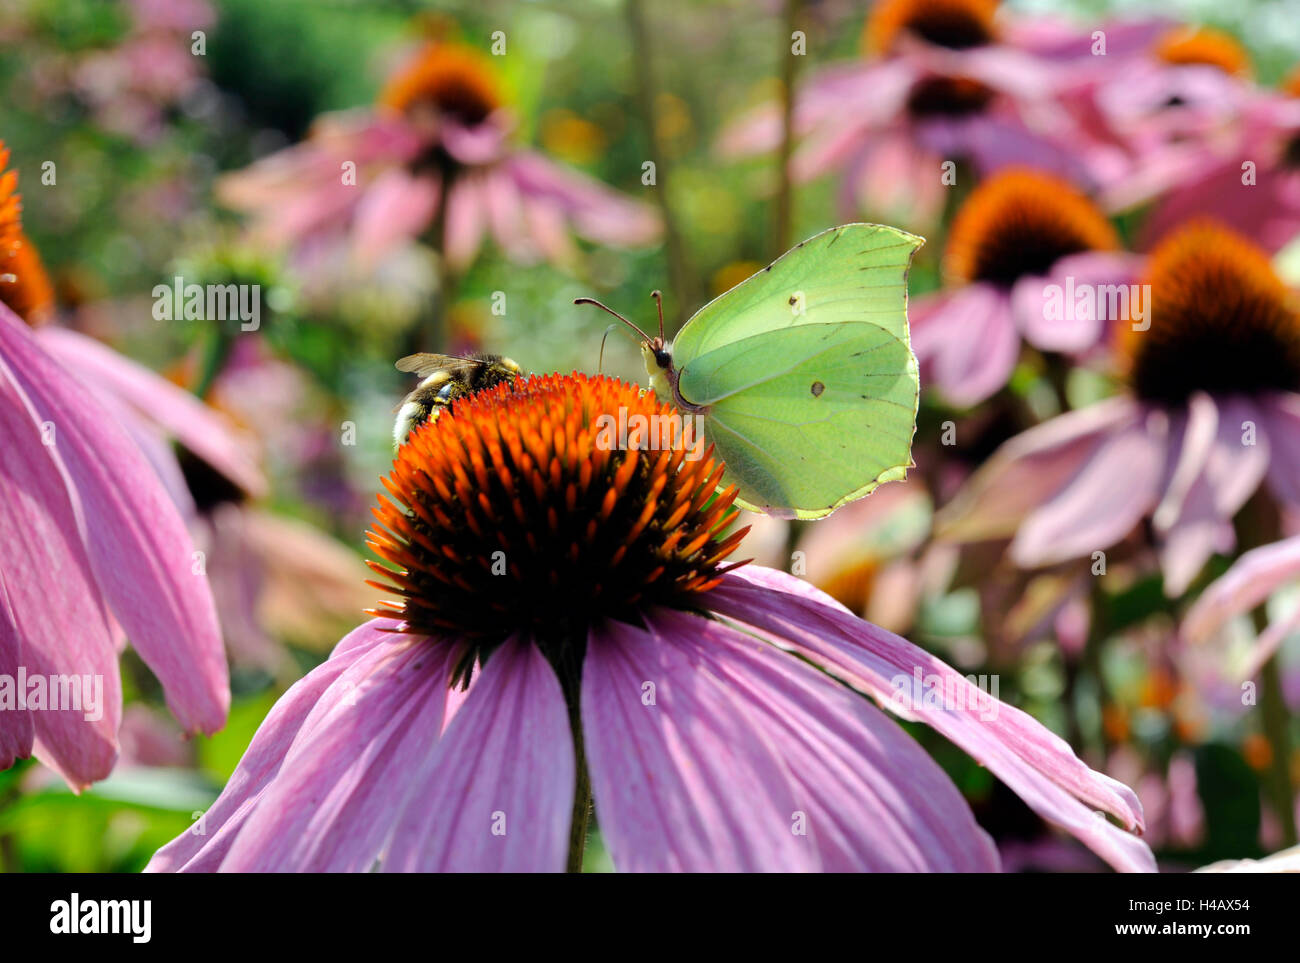 Brimstone butterfly lowering the proboscis in the tongue blossoms of a purple coneflower, also Rudbeckia, in the patch of a cottage garden Stock Photo